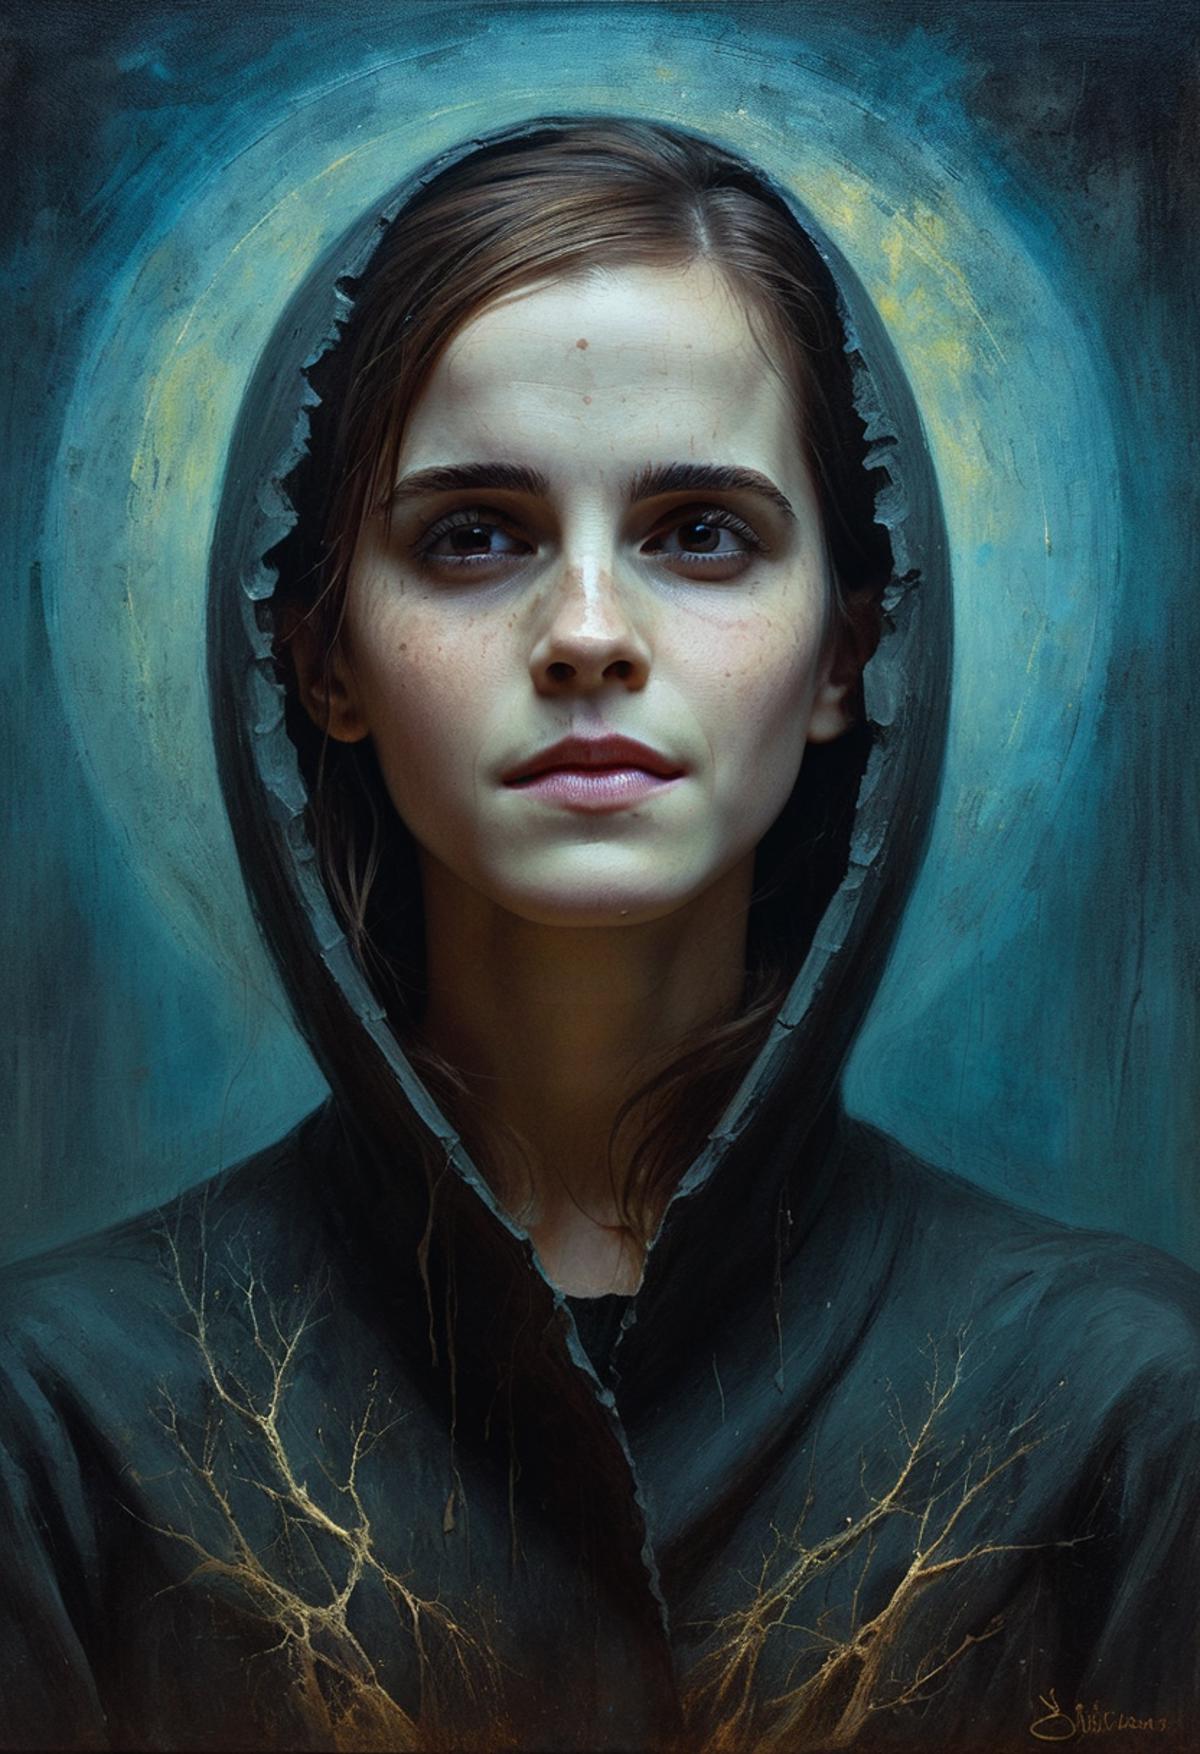 A portrait of a young woman wearing a hooded sweatshirt.